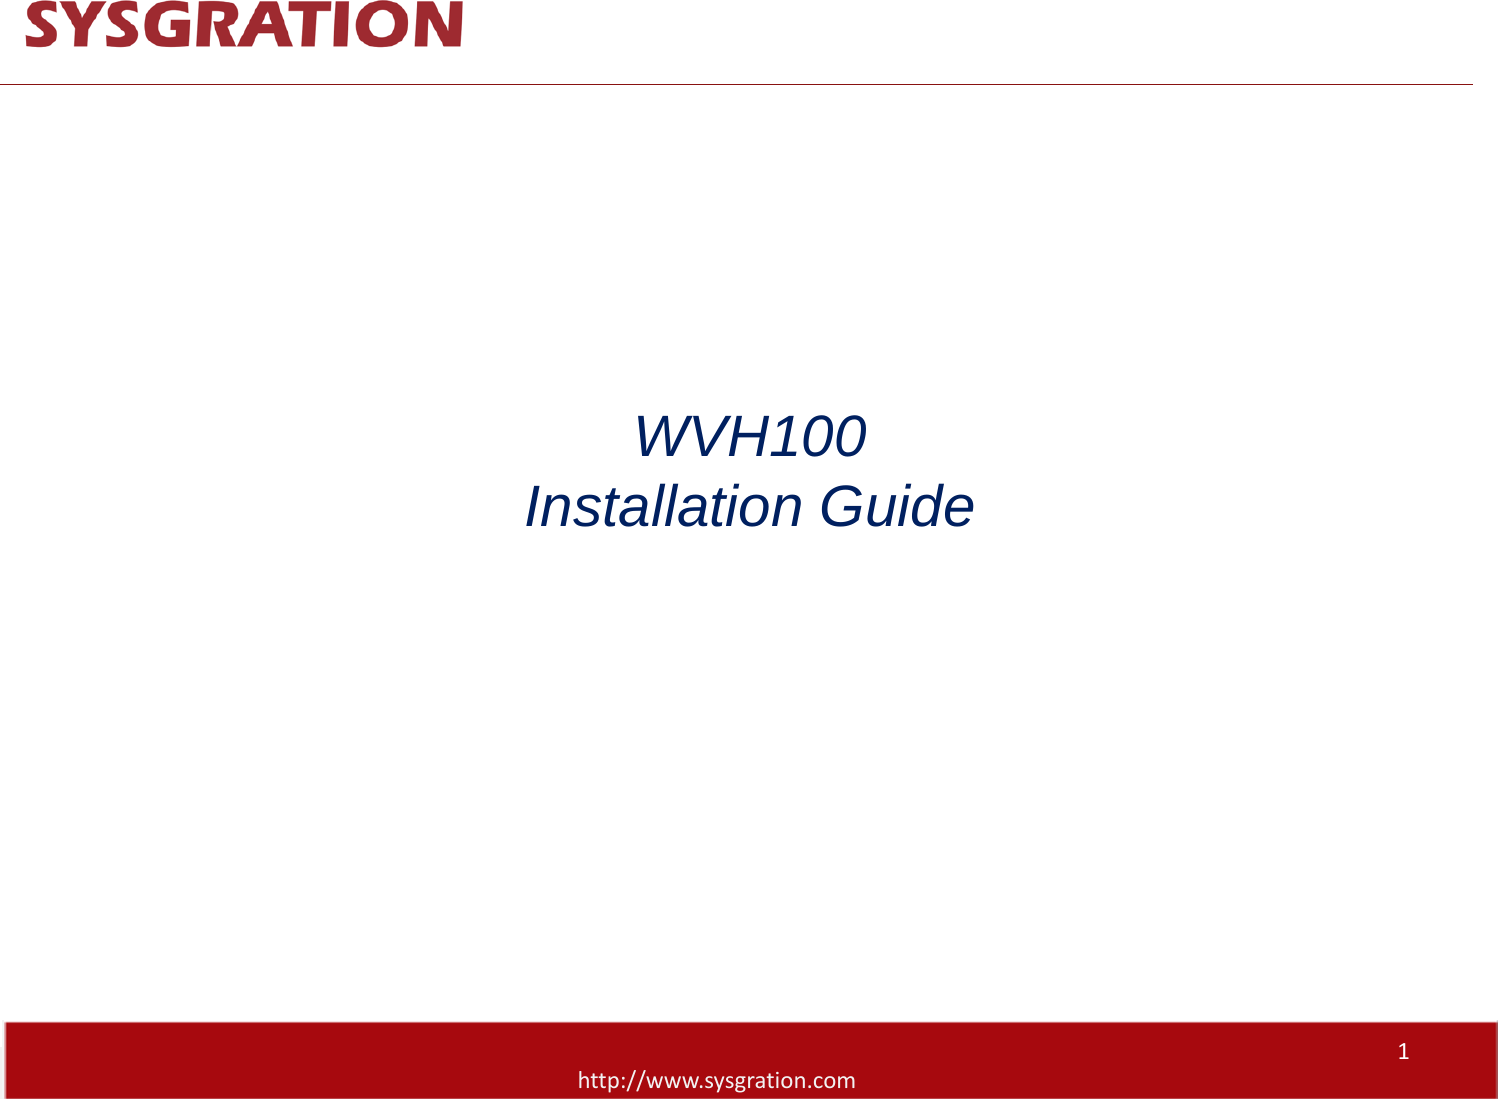 WVH100 Installation GuideConfidential2017/9/5 http://www.sysgration.com1